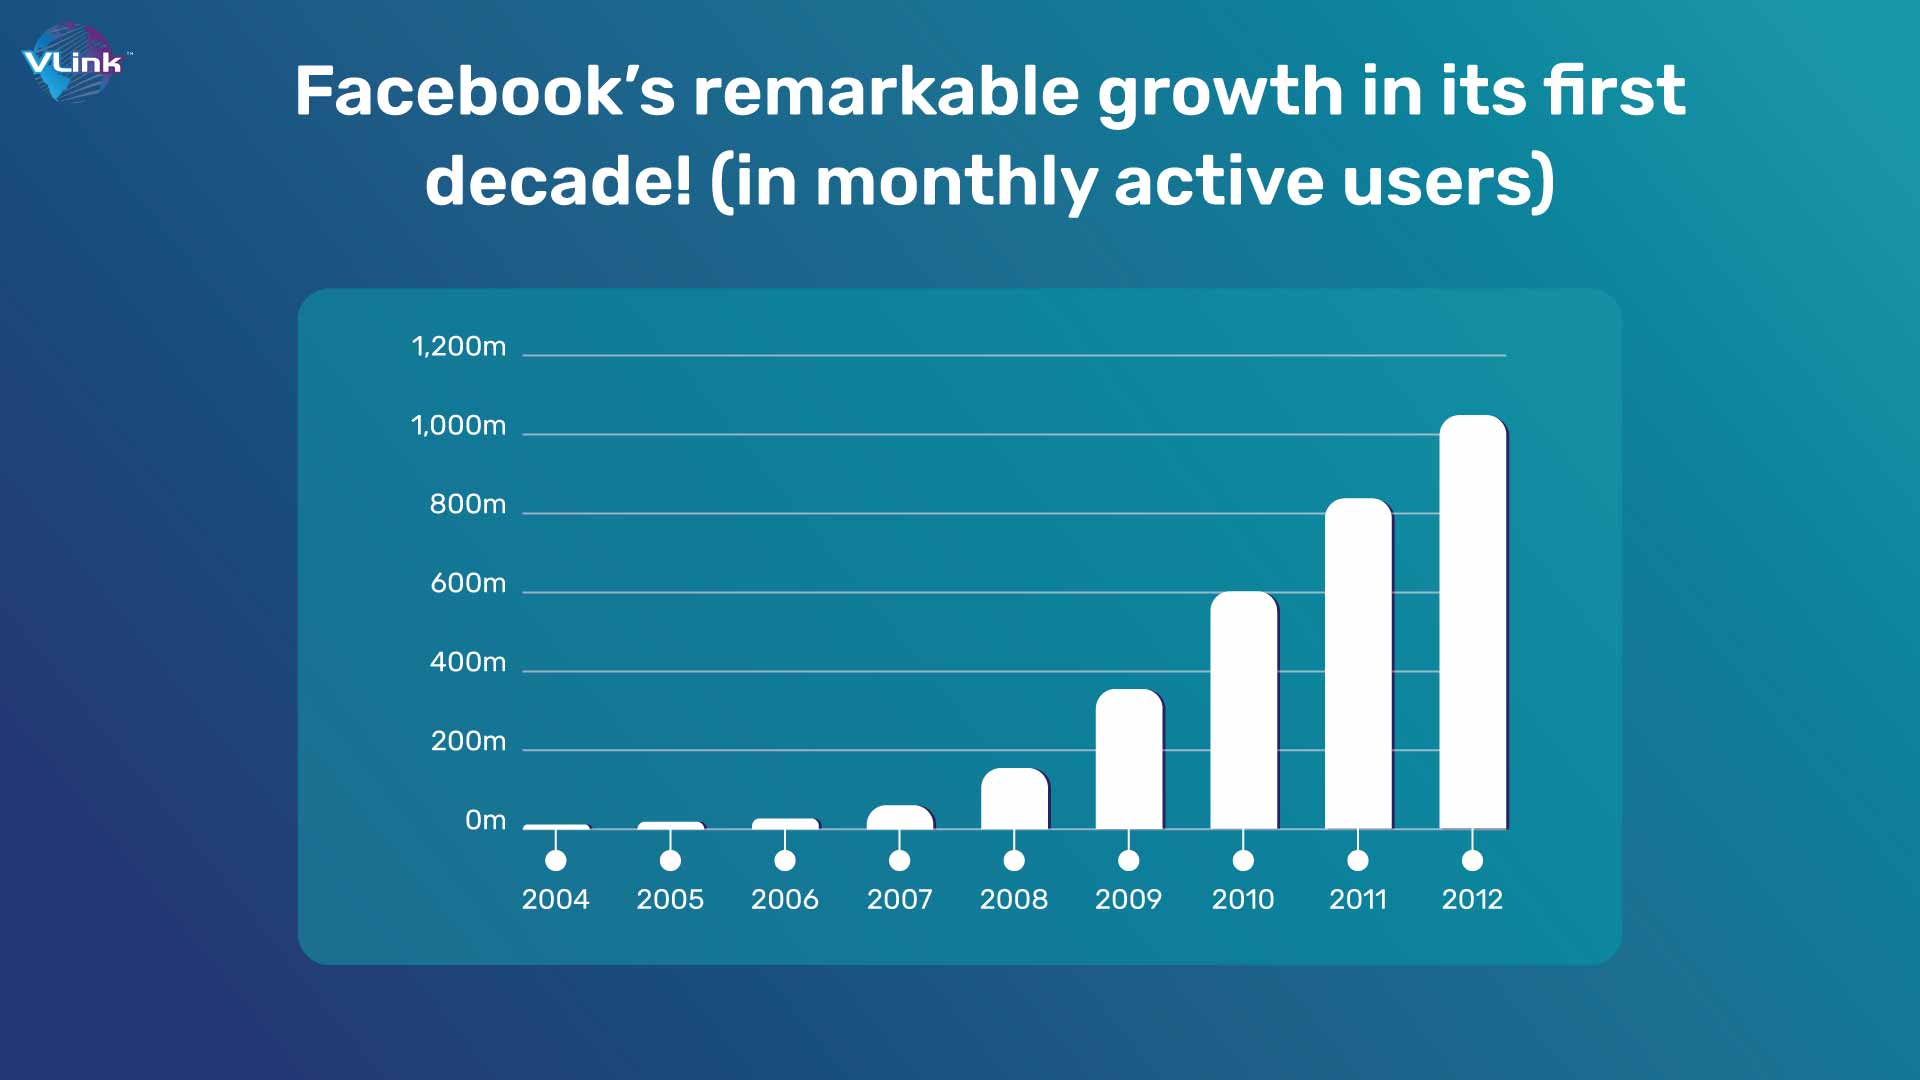 Facebook’s remarkable growth in its first decade! (in monthly active users)